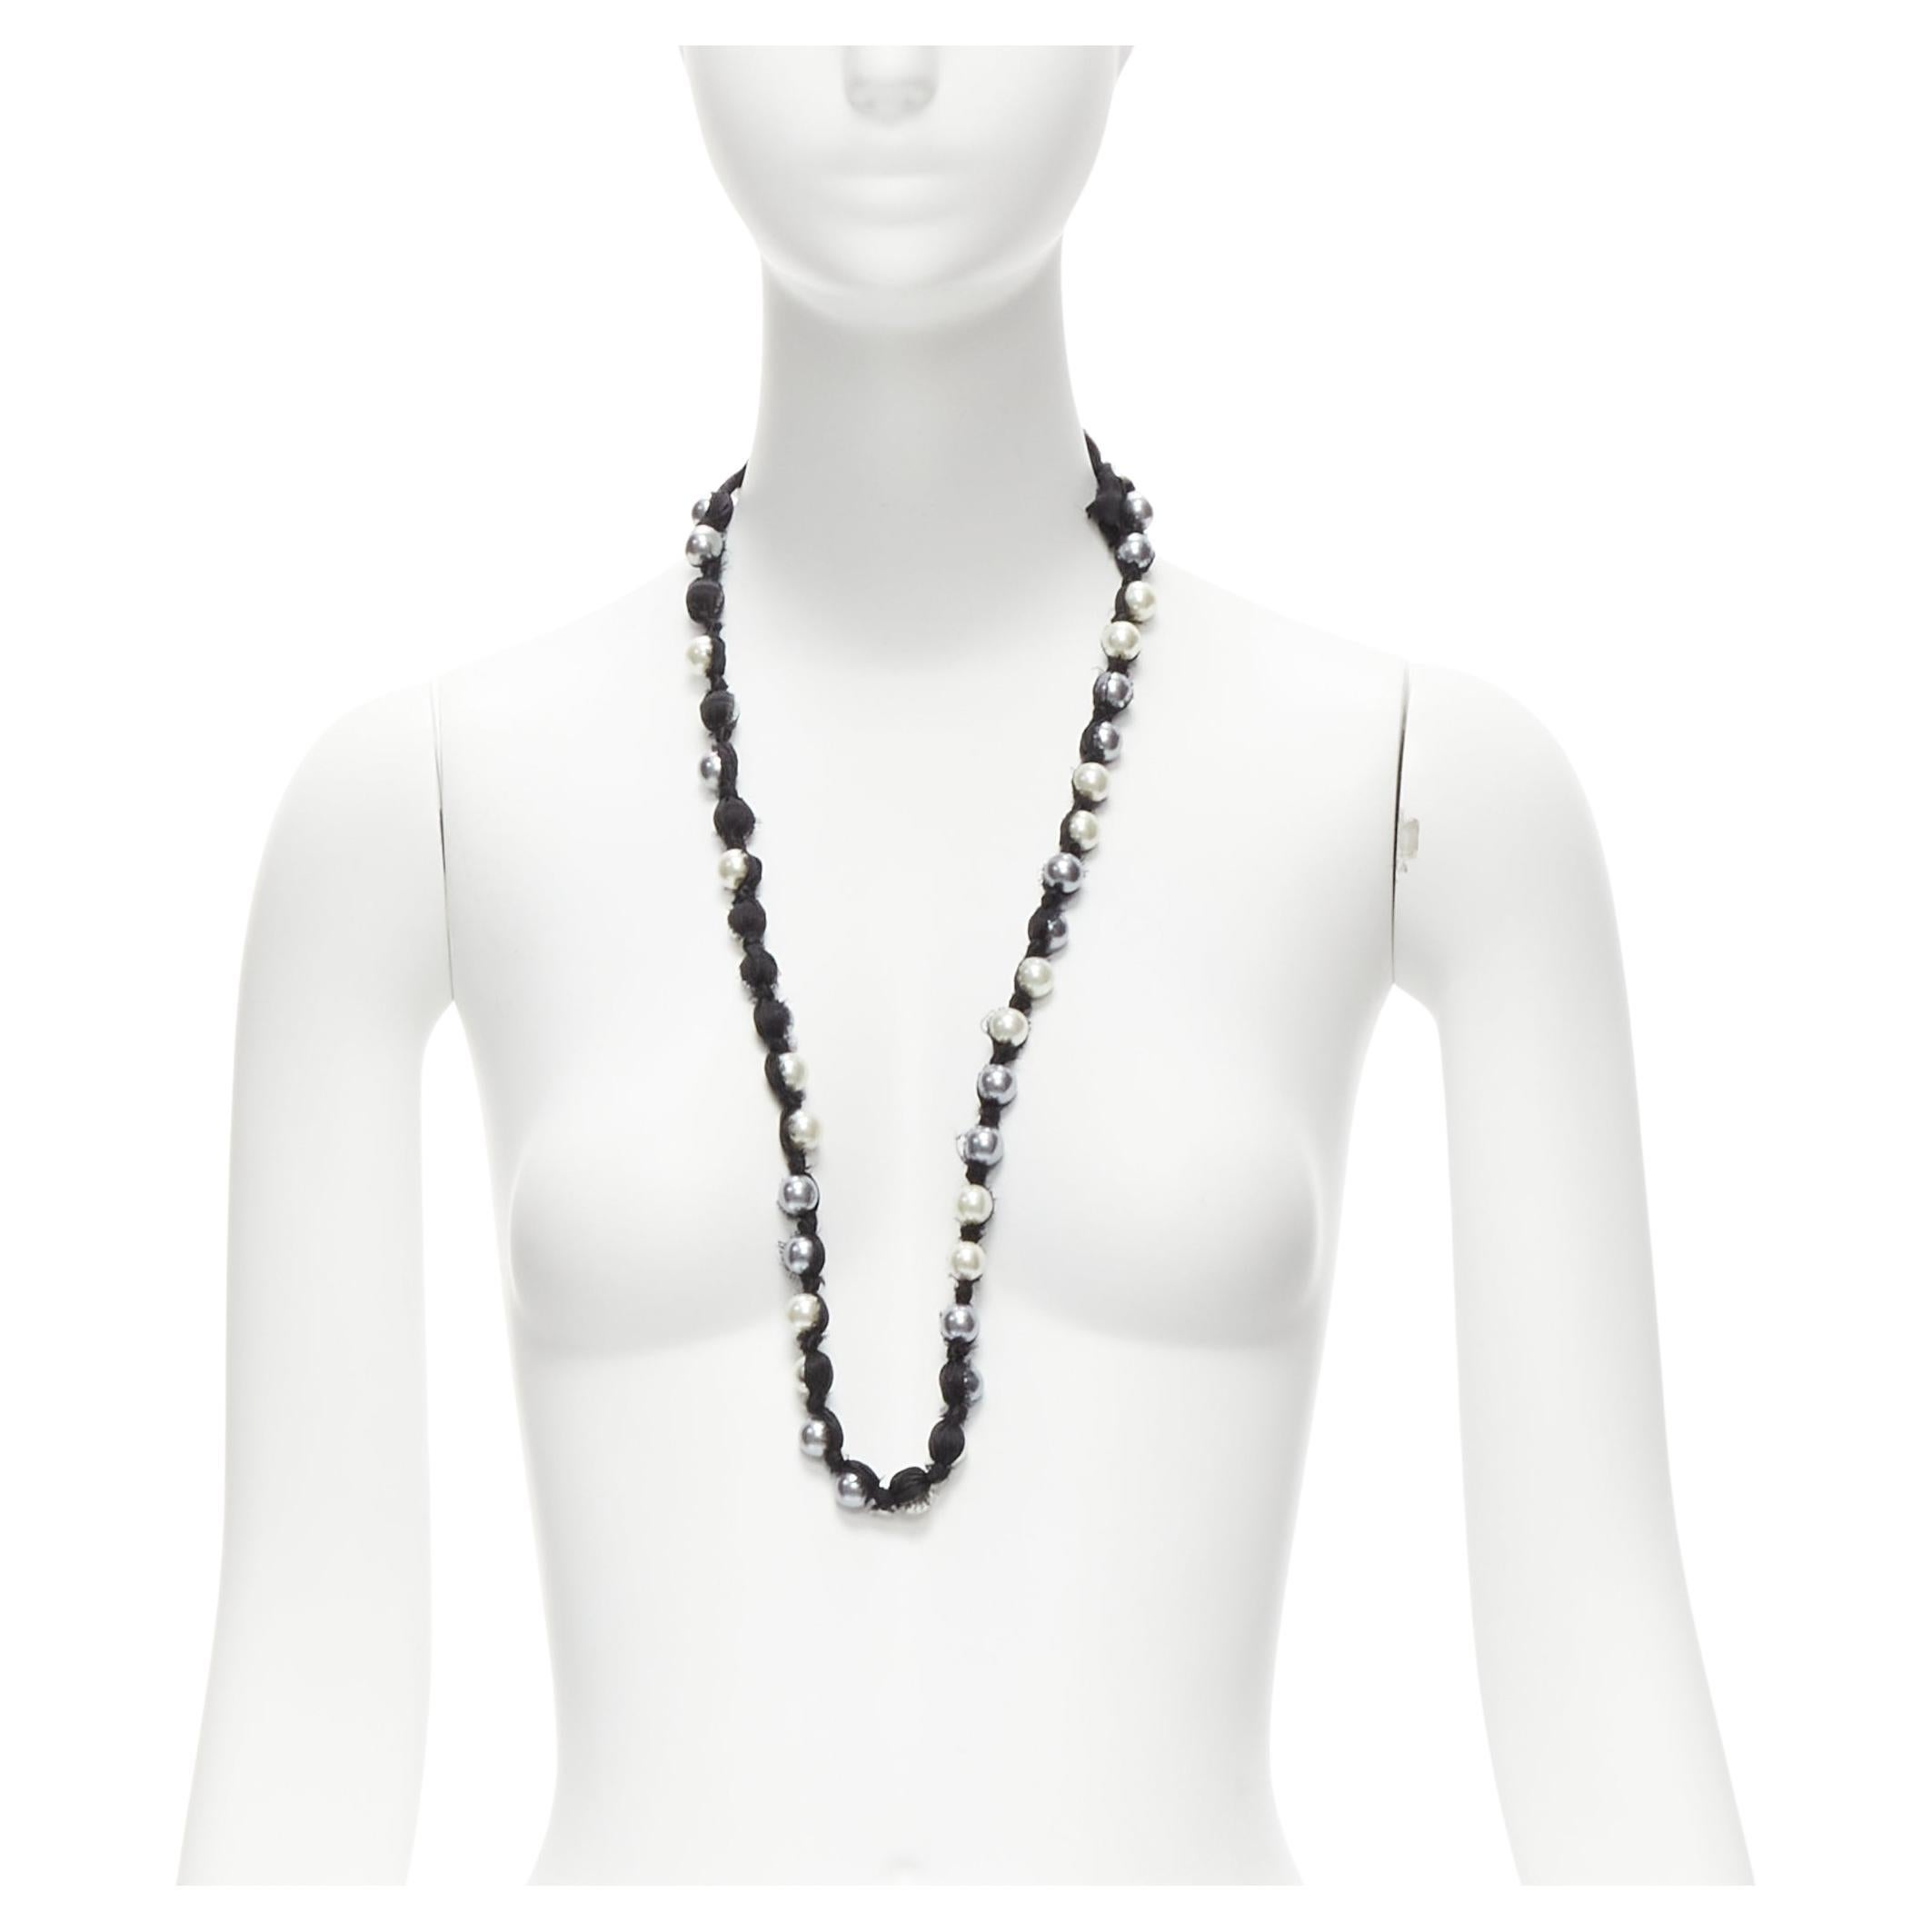 LANVIN ALBER ELBAZ cream charcoal black pearl silk ribbon wrapped long necklace For Sale